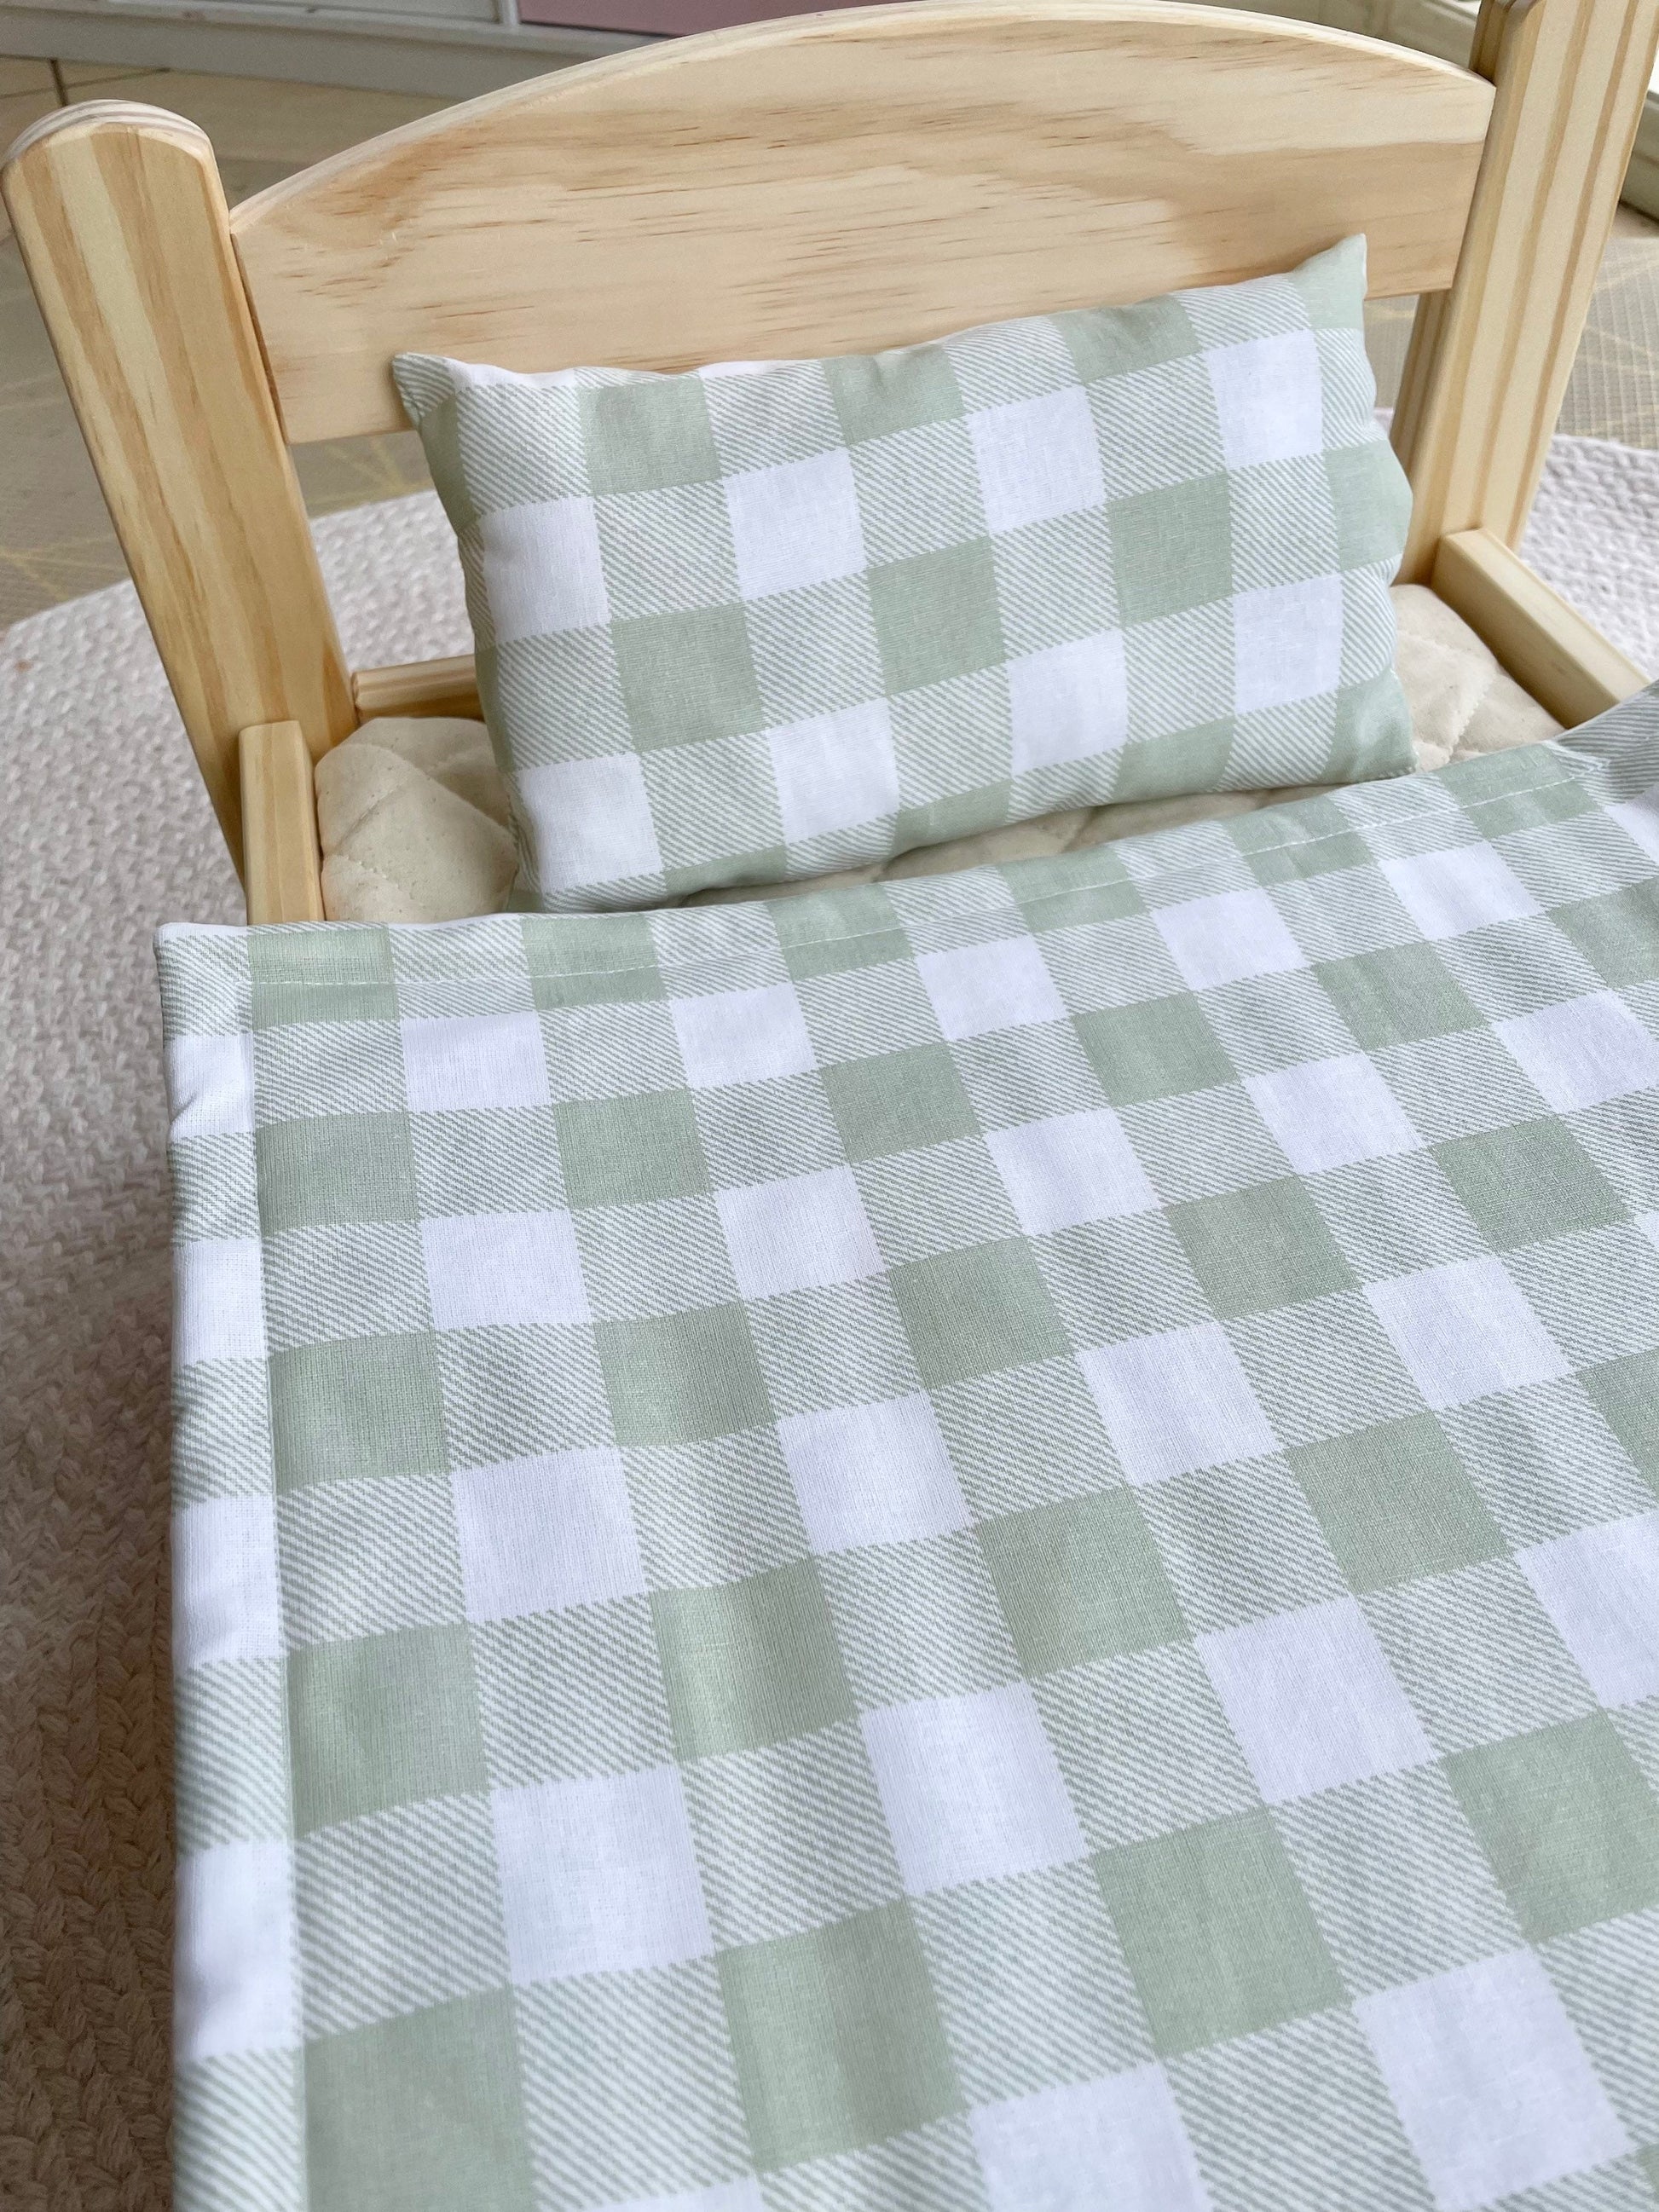 Sage Gingham Doll Bedding | Gift for nephew | Crib sheet a pillow toy set | Doll Bed Cover Linen | Cot Blanket | Crib Bedding | Pram Pillows